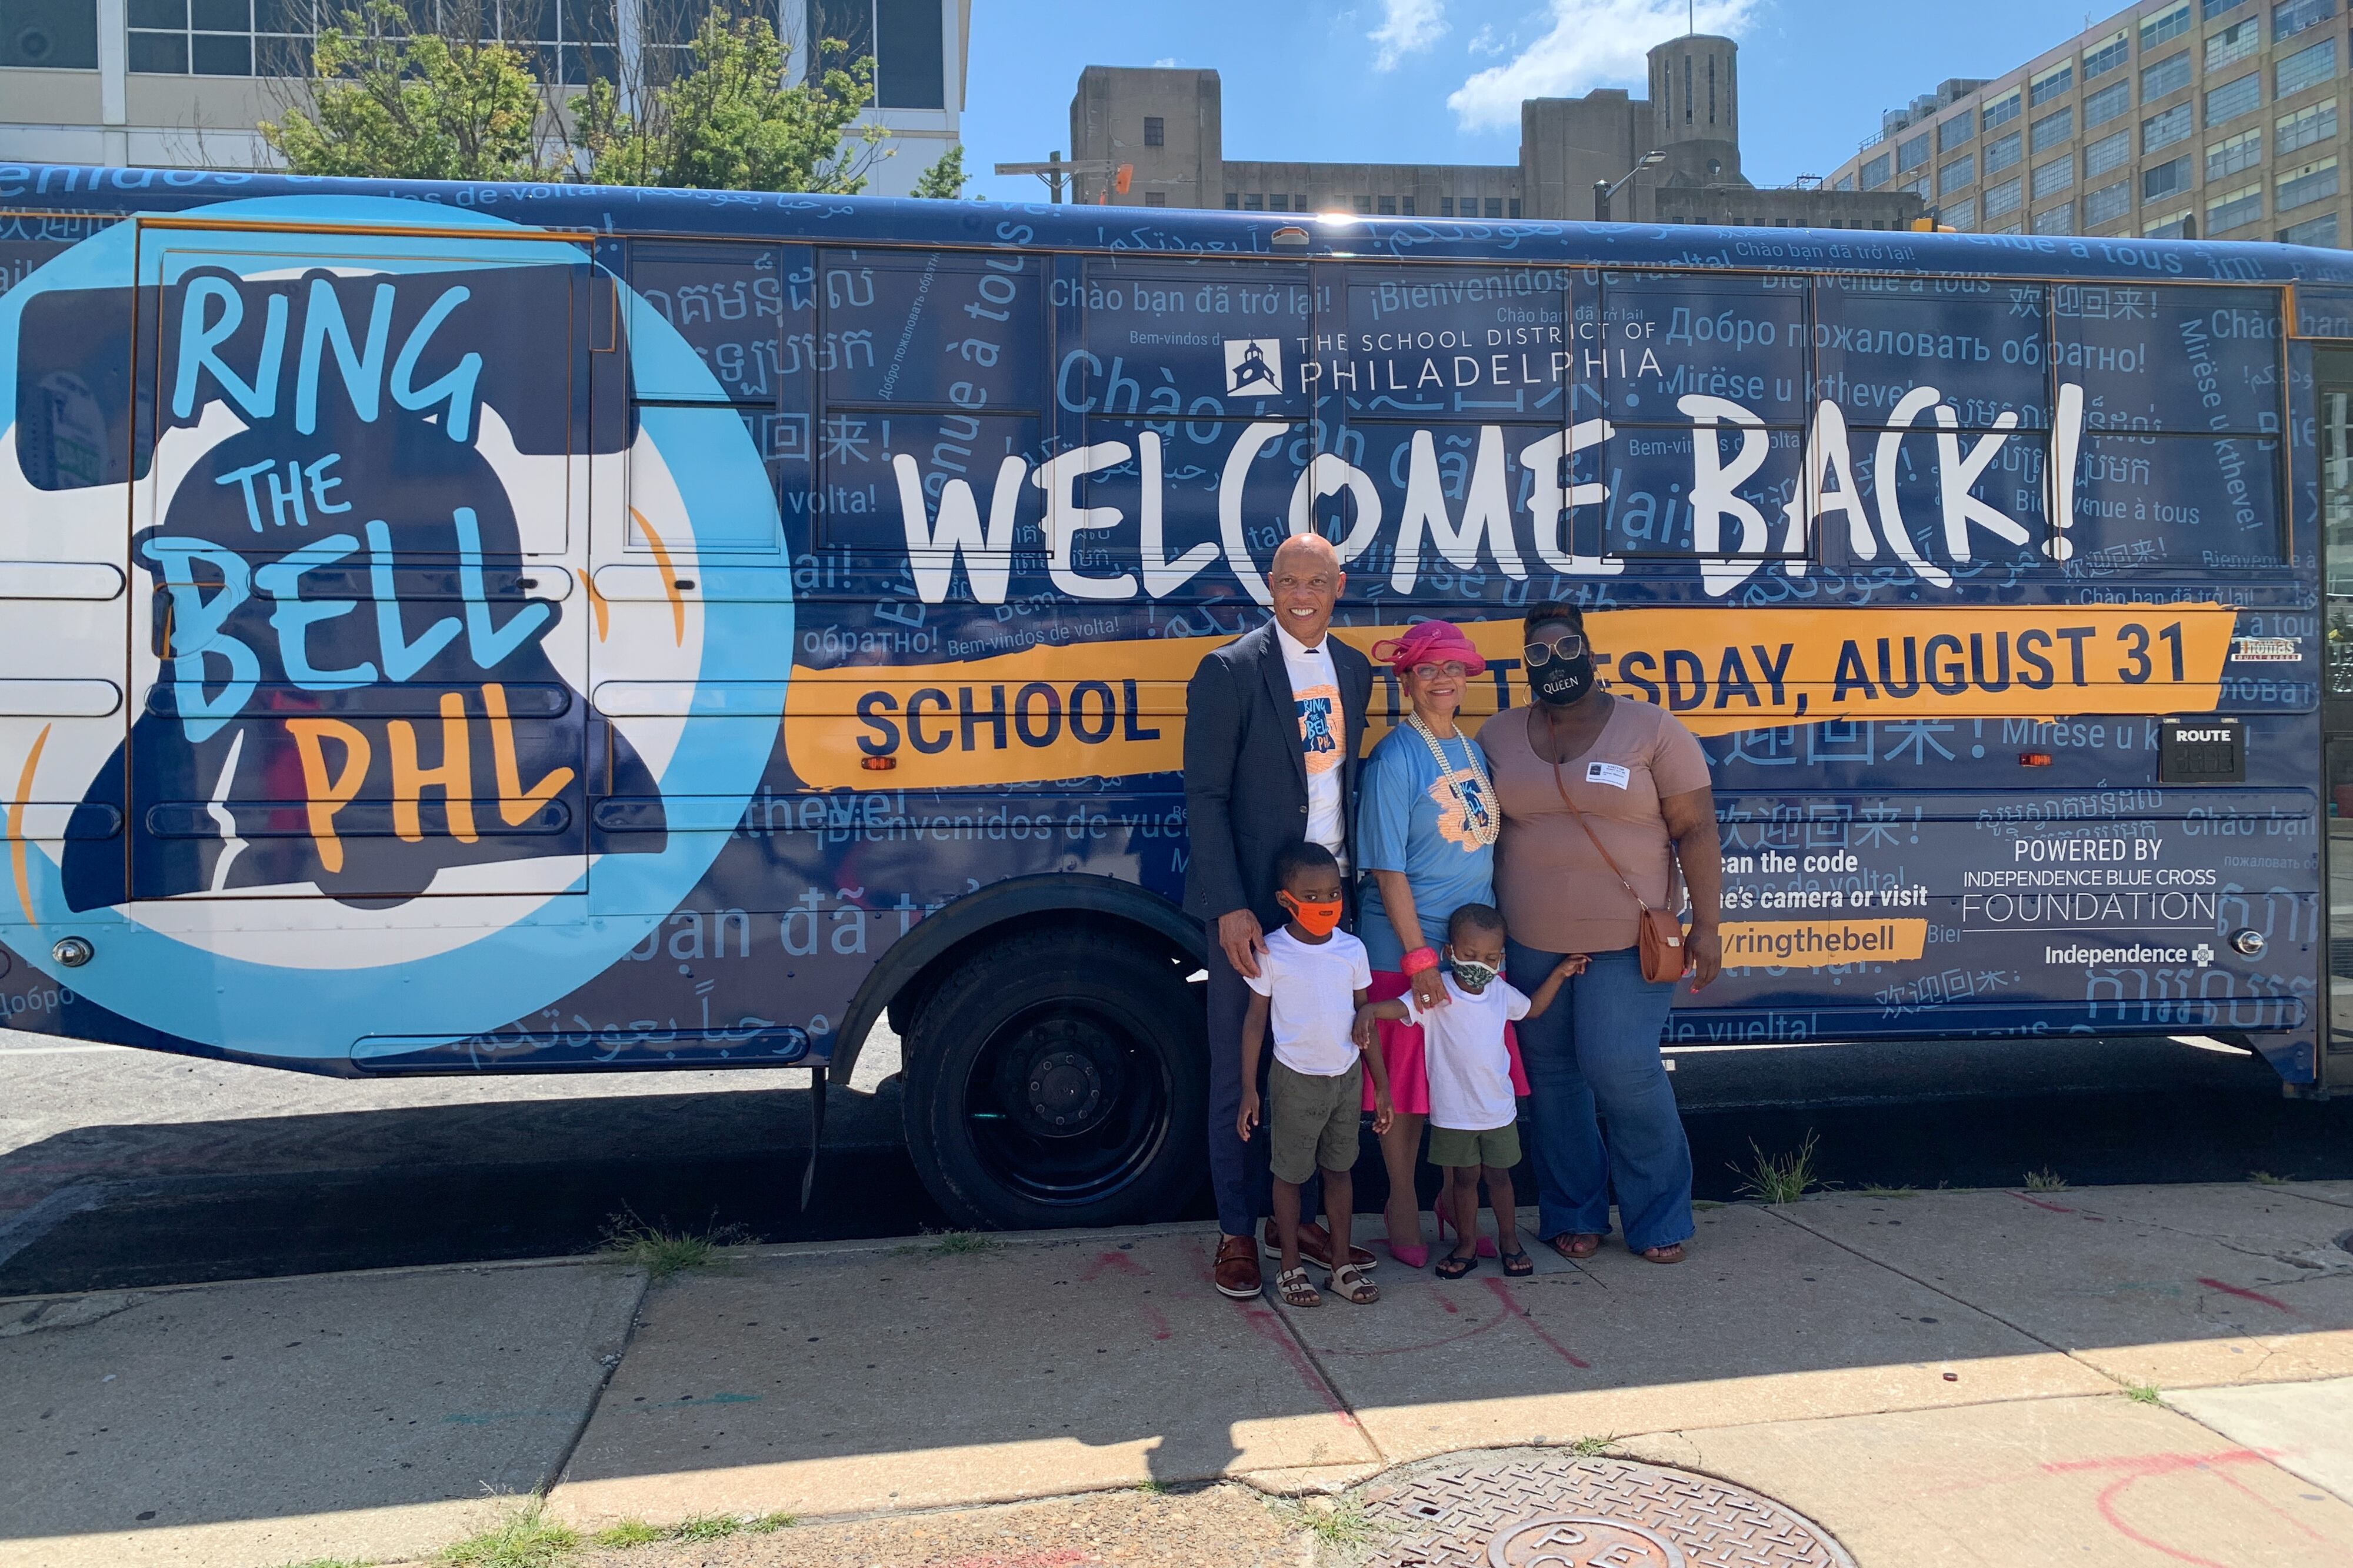 Philadelphia Superintendent William Hite stands in front of a large bus that reads “Ring the Bell PHL, Welcome Back!” with two women and two young boys.